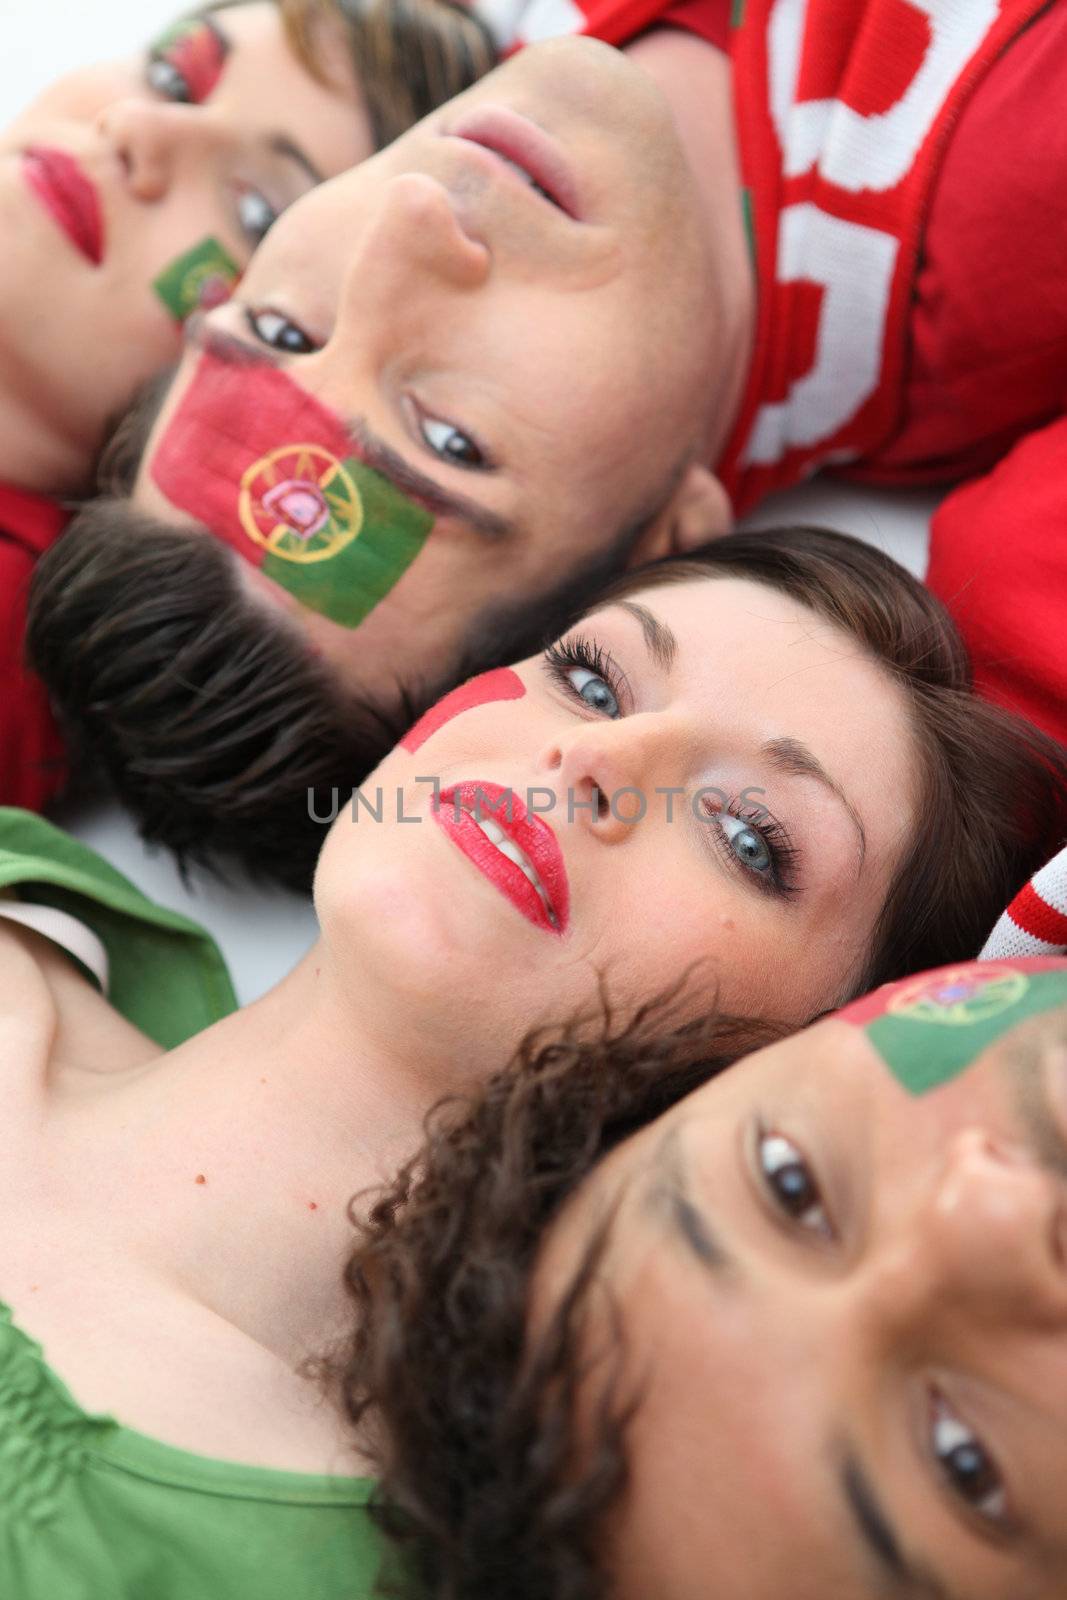 Passionate Portugal fans by phovoir